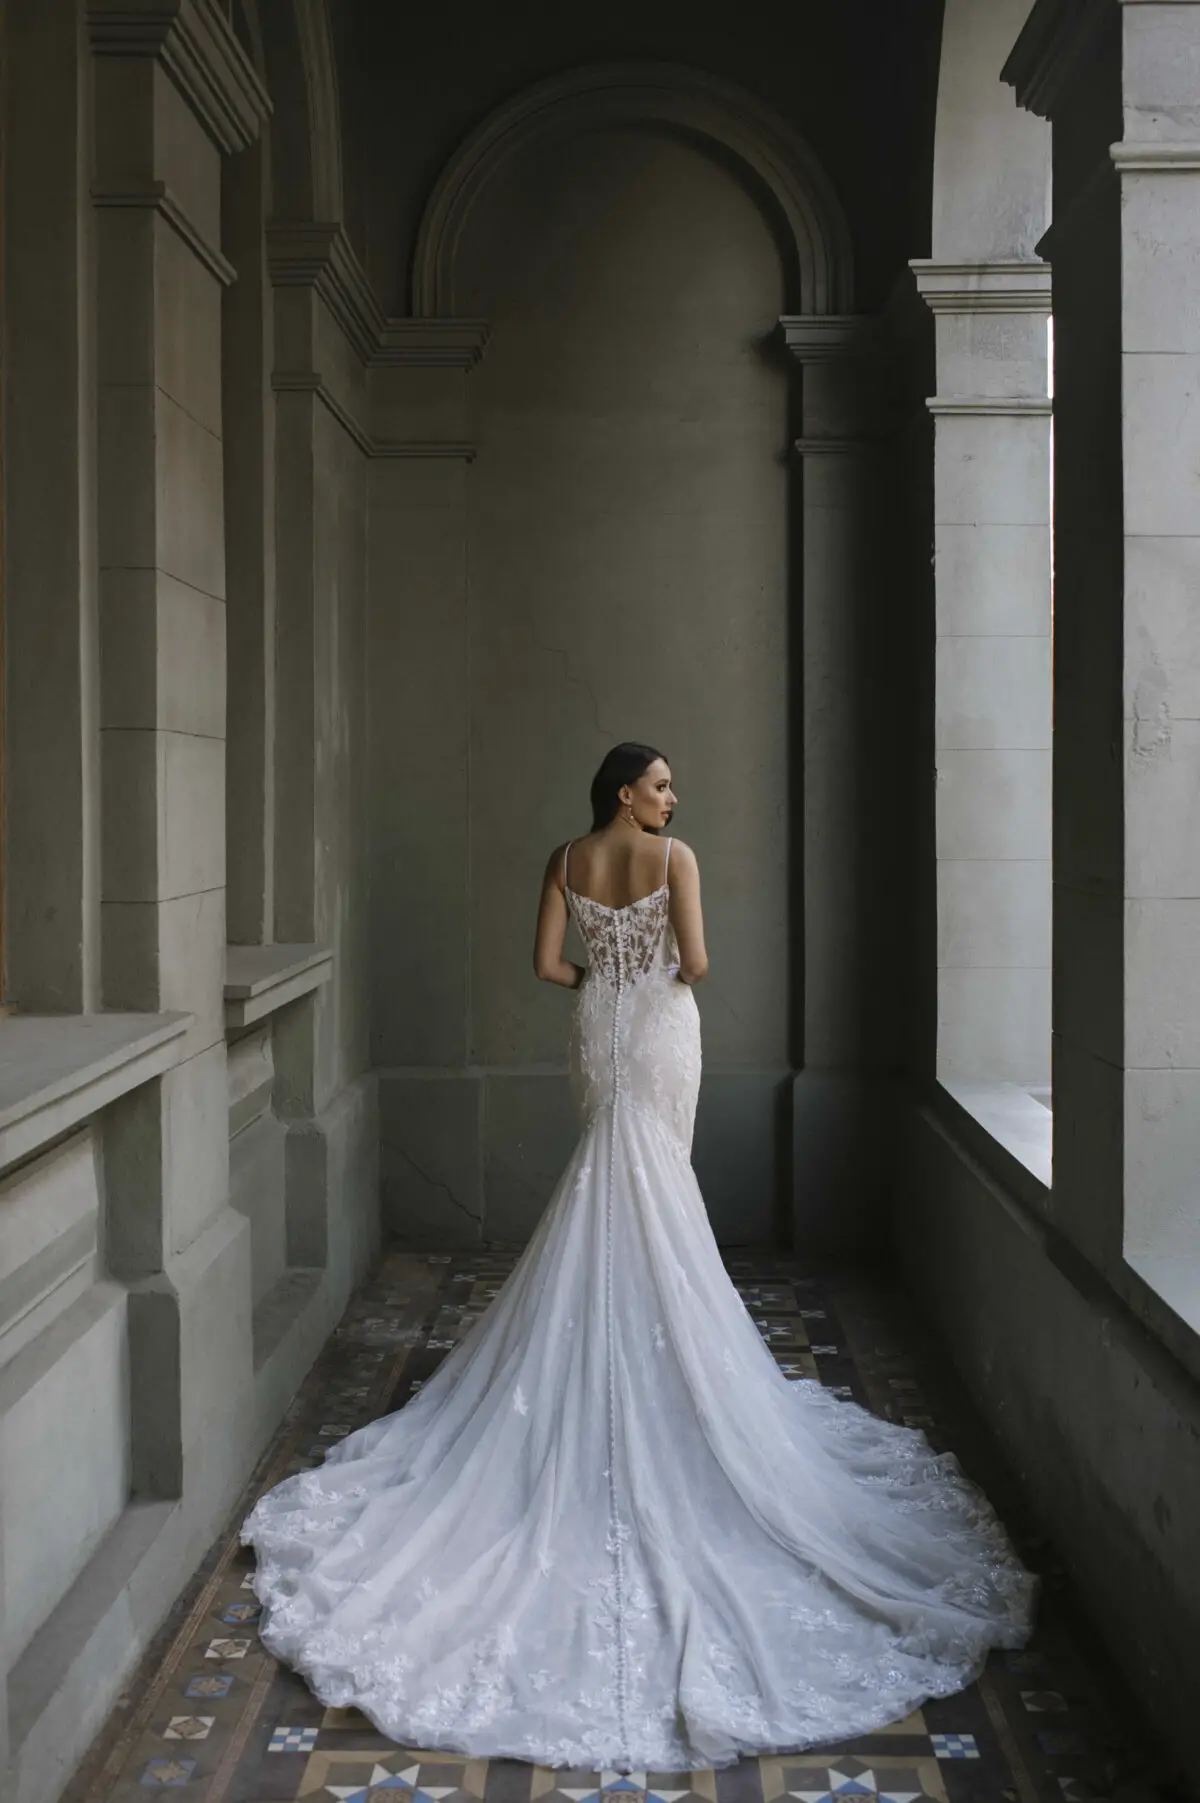 Lace Bridal Gown by Martina Liana - Style: 1389